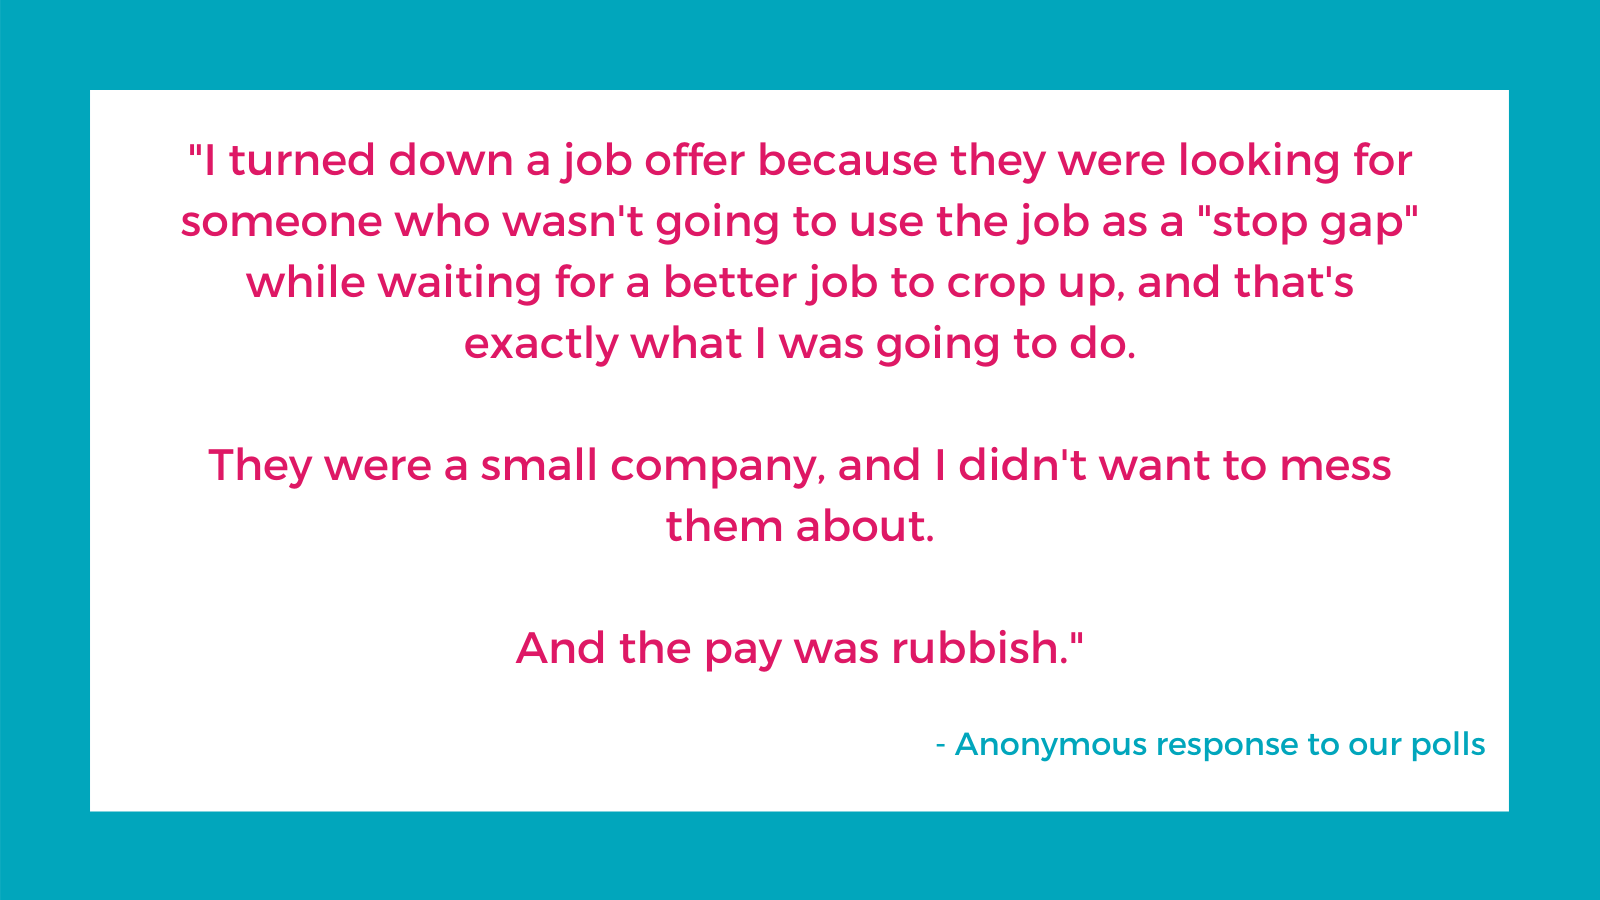 An honest answer why someone turned down a job offer